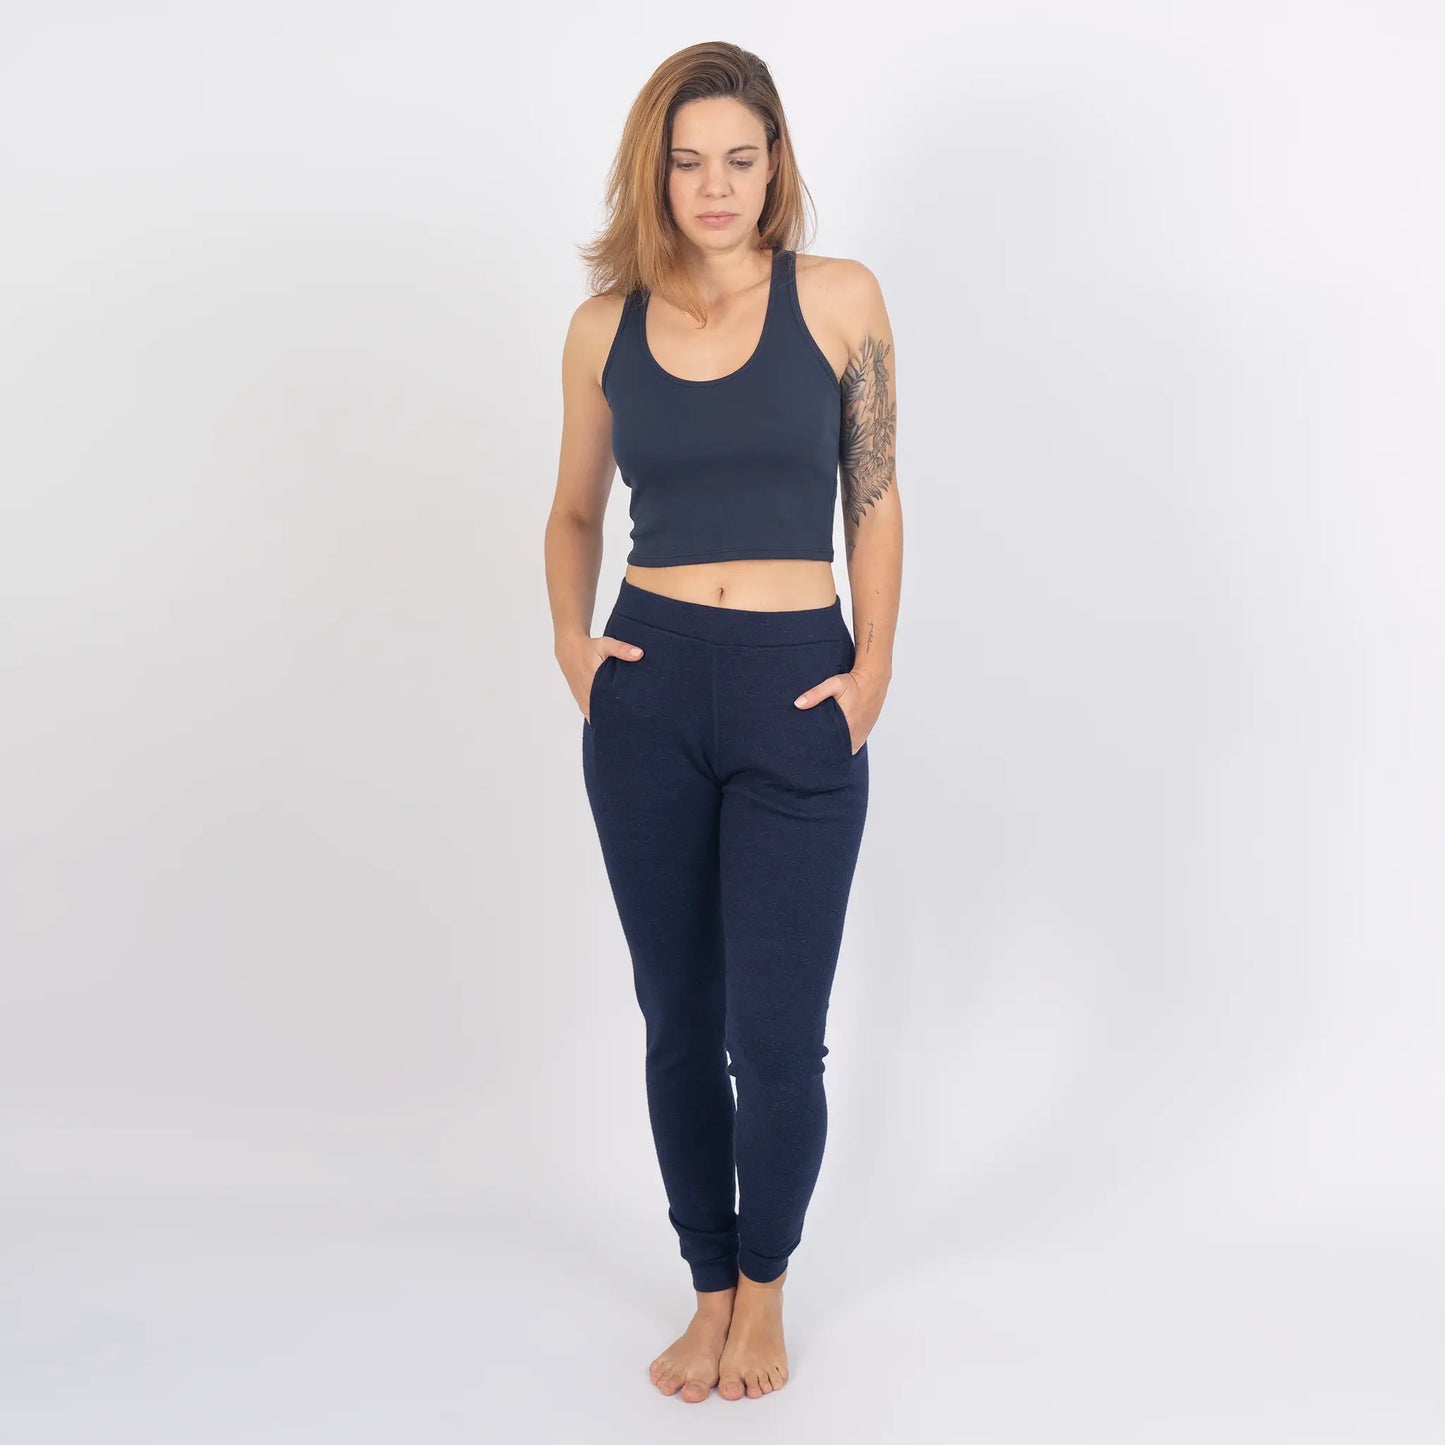 womens all natural sweatpants color navy blue